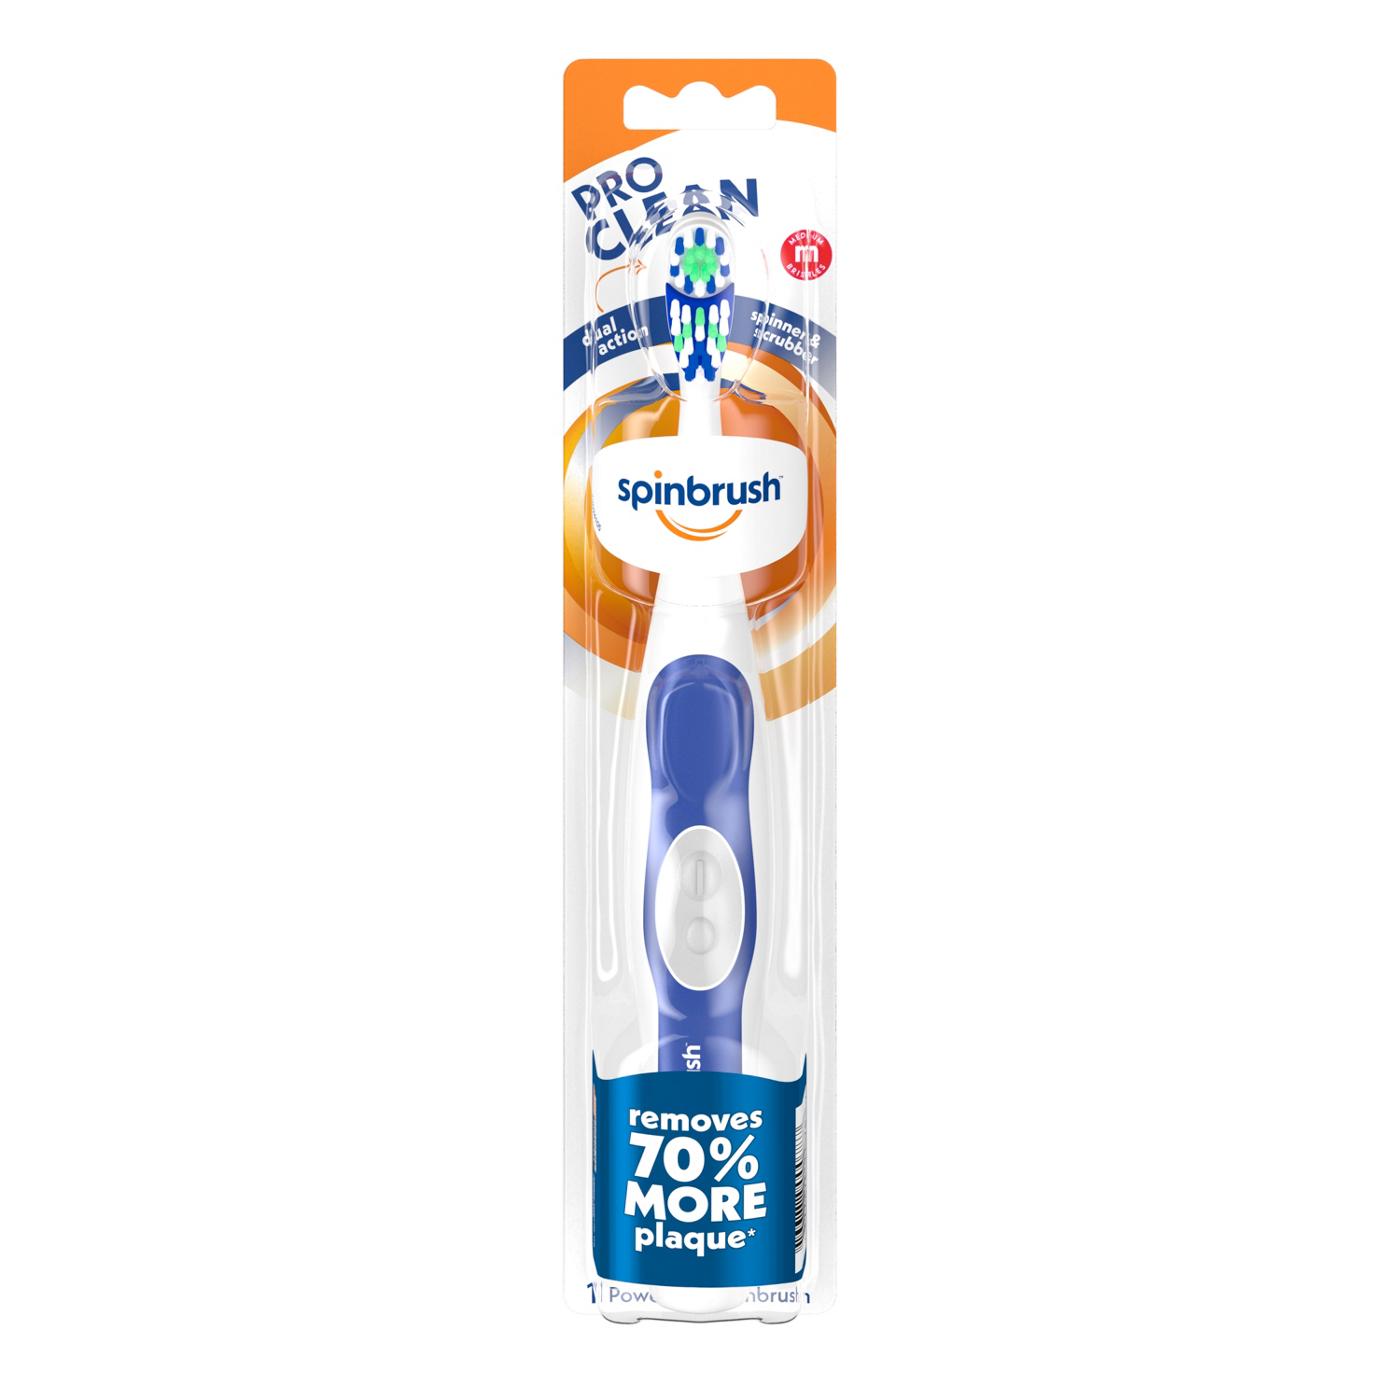 Arm & Hammer Spinbrush ProClean Powered Medium Toothbrush - Colors May Vary; image 1 of 2